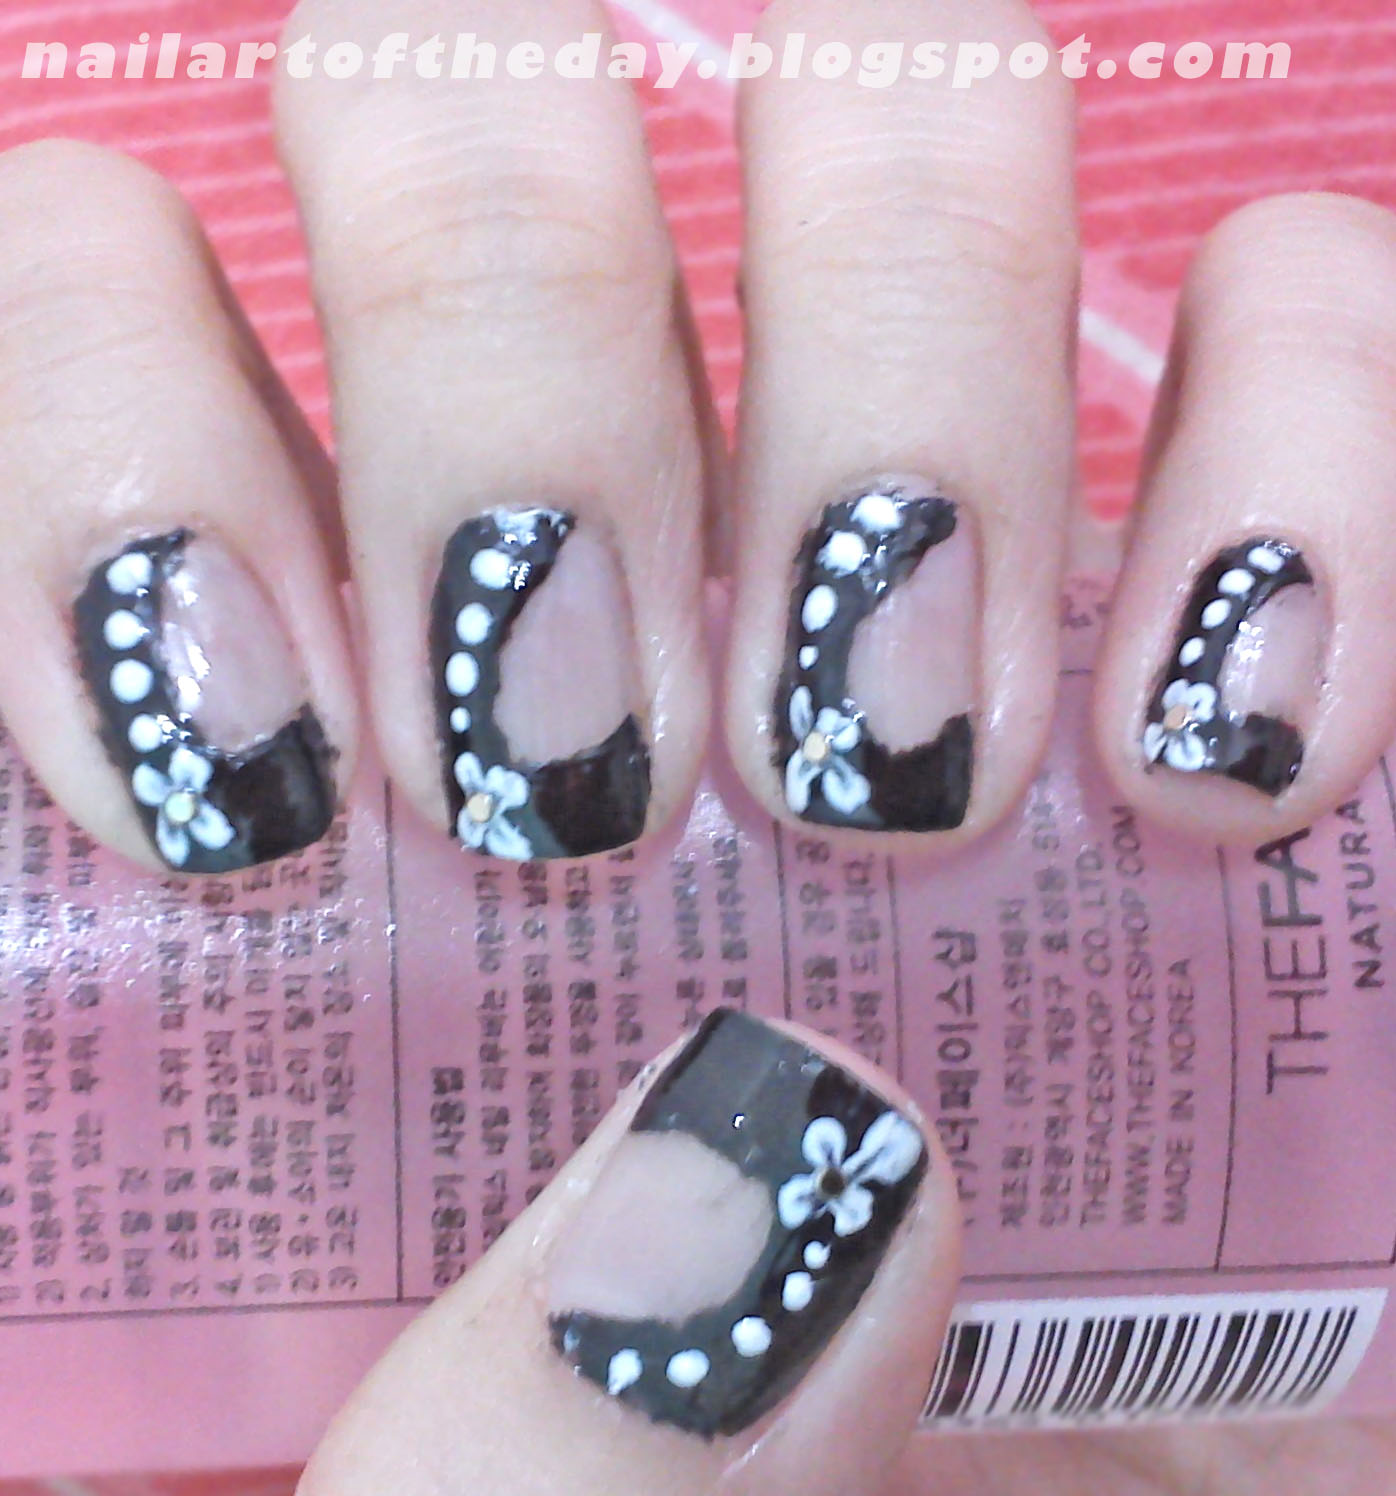 nail art of the day : Nail Art - Simple Flower and dots